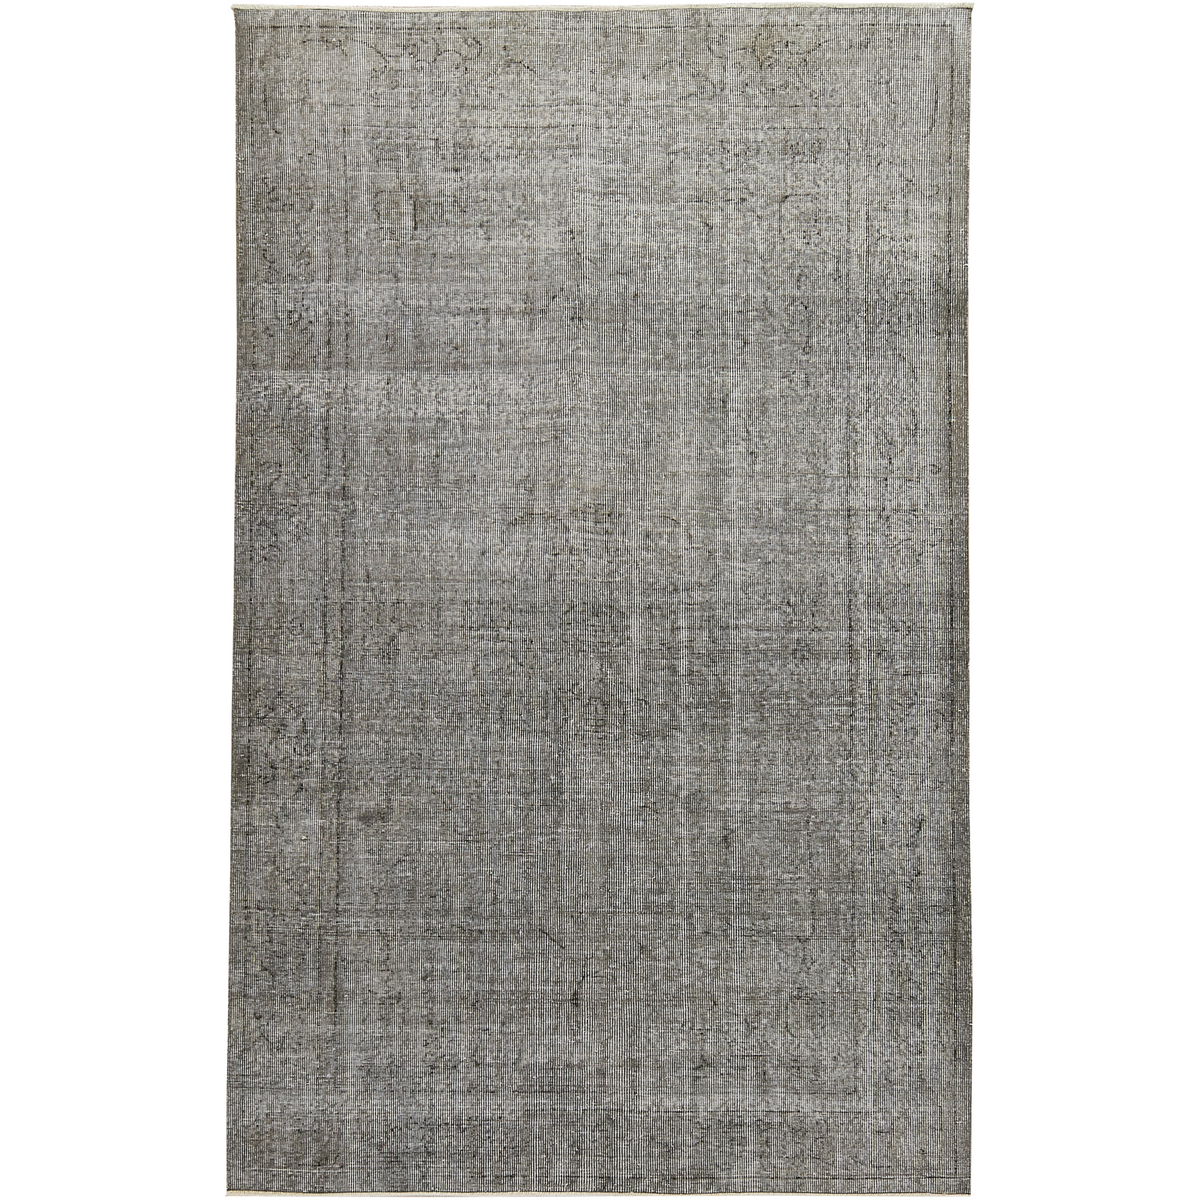 Baileah | Sophisticated Gray Area Rug | Kuden Rugs